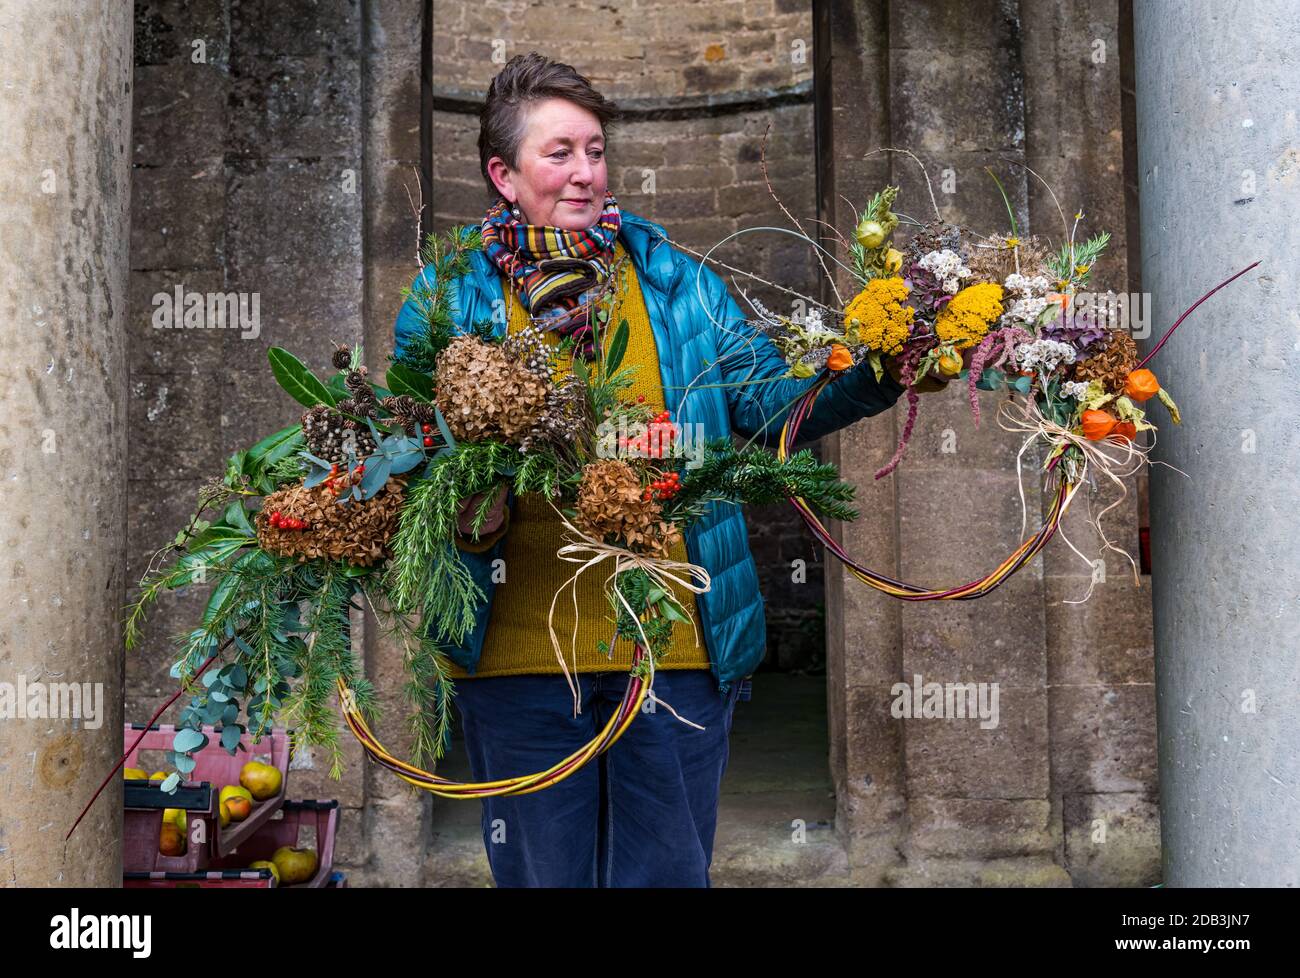 Haddington, East Lothian, Scotland, UK, Flowersmith prepares for Christmas:  Ruth Alder, a flower smith, weaves willow into wreaths to decorate for Christmas using foliage and flowers from Amisfield Walled Garden where she is a volunteer. Amisfield Walled garden is an 18th century garden managed by the Amisfield Preservation Trust and is free to visit all year round. Pictured: Ruth with finished Christmas decorated wreaths Stock Photo